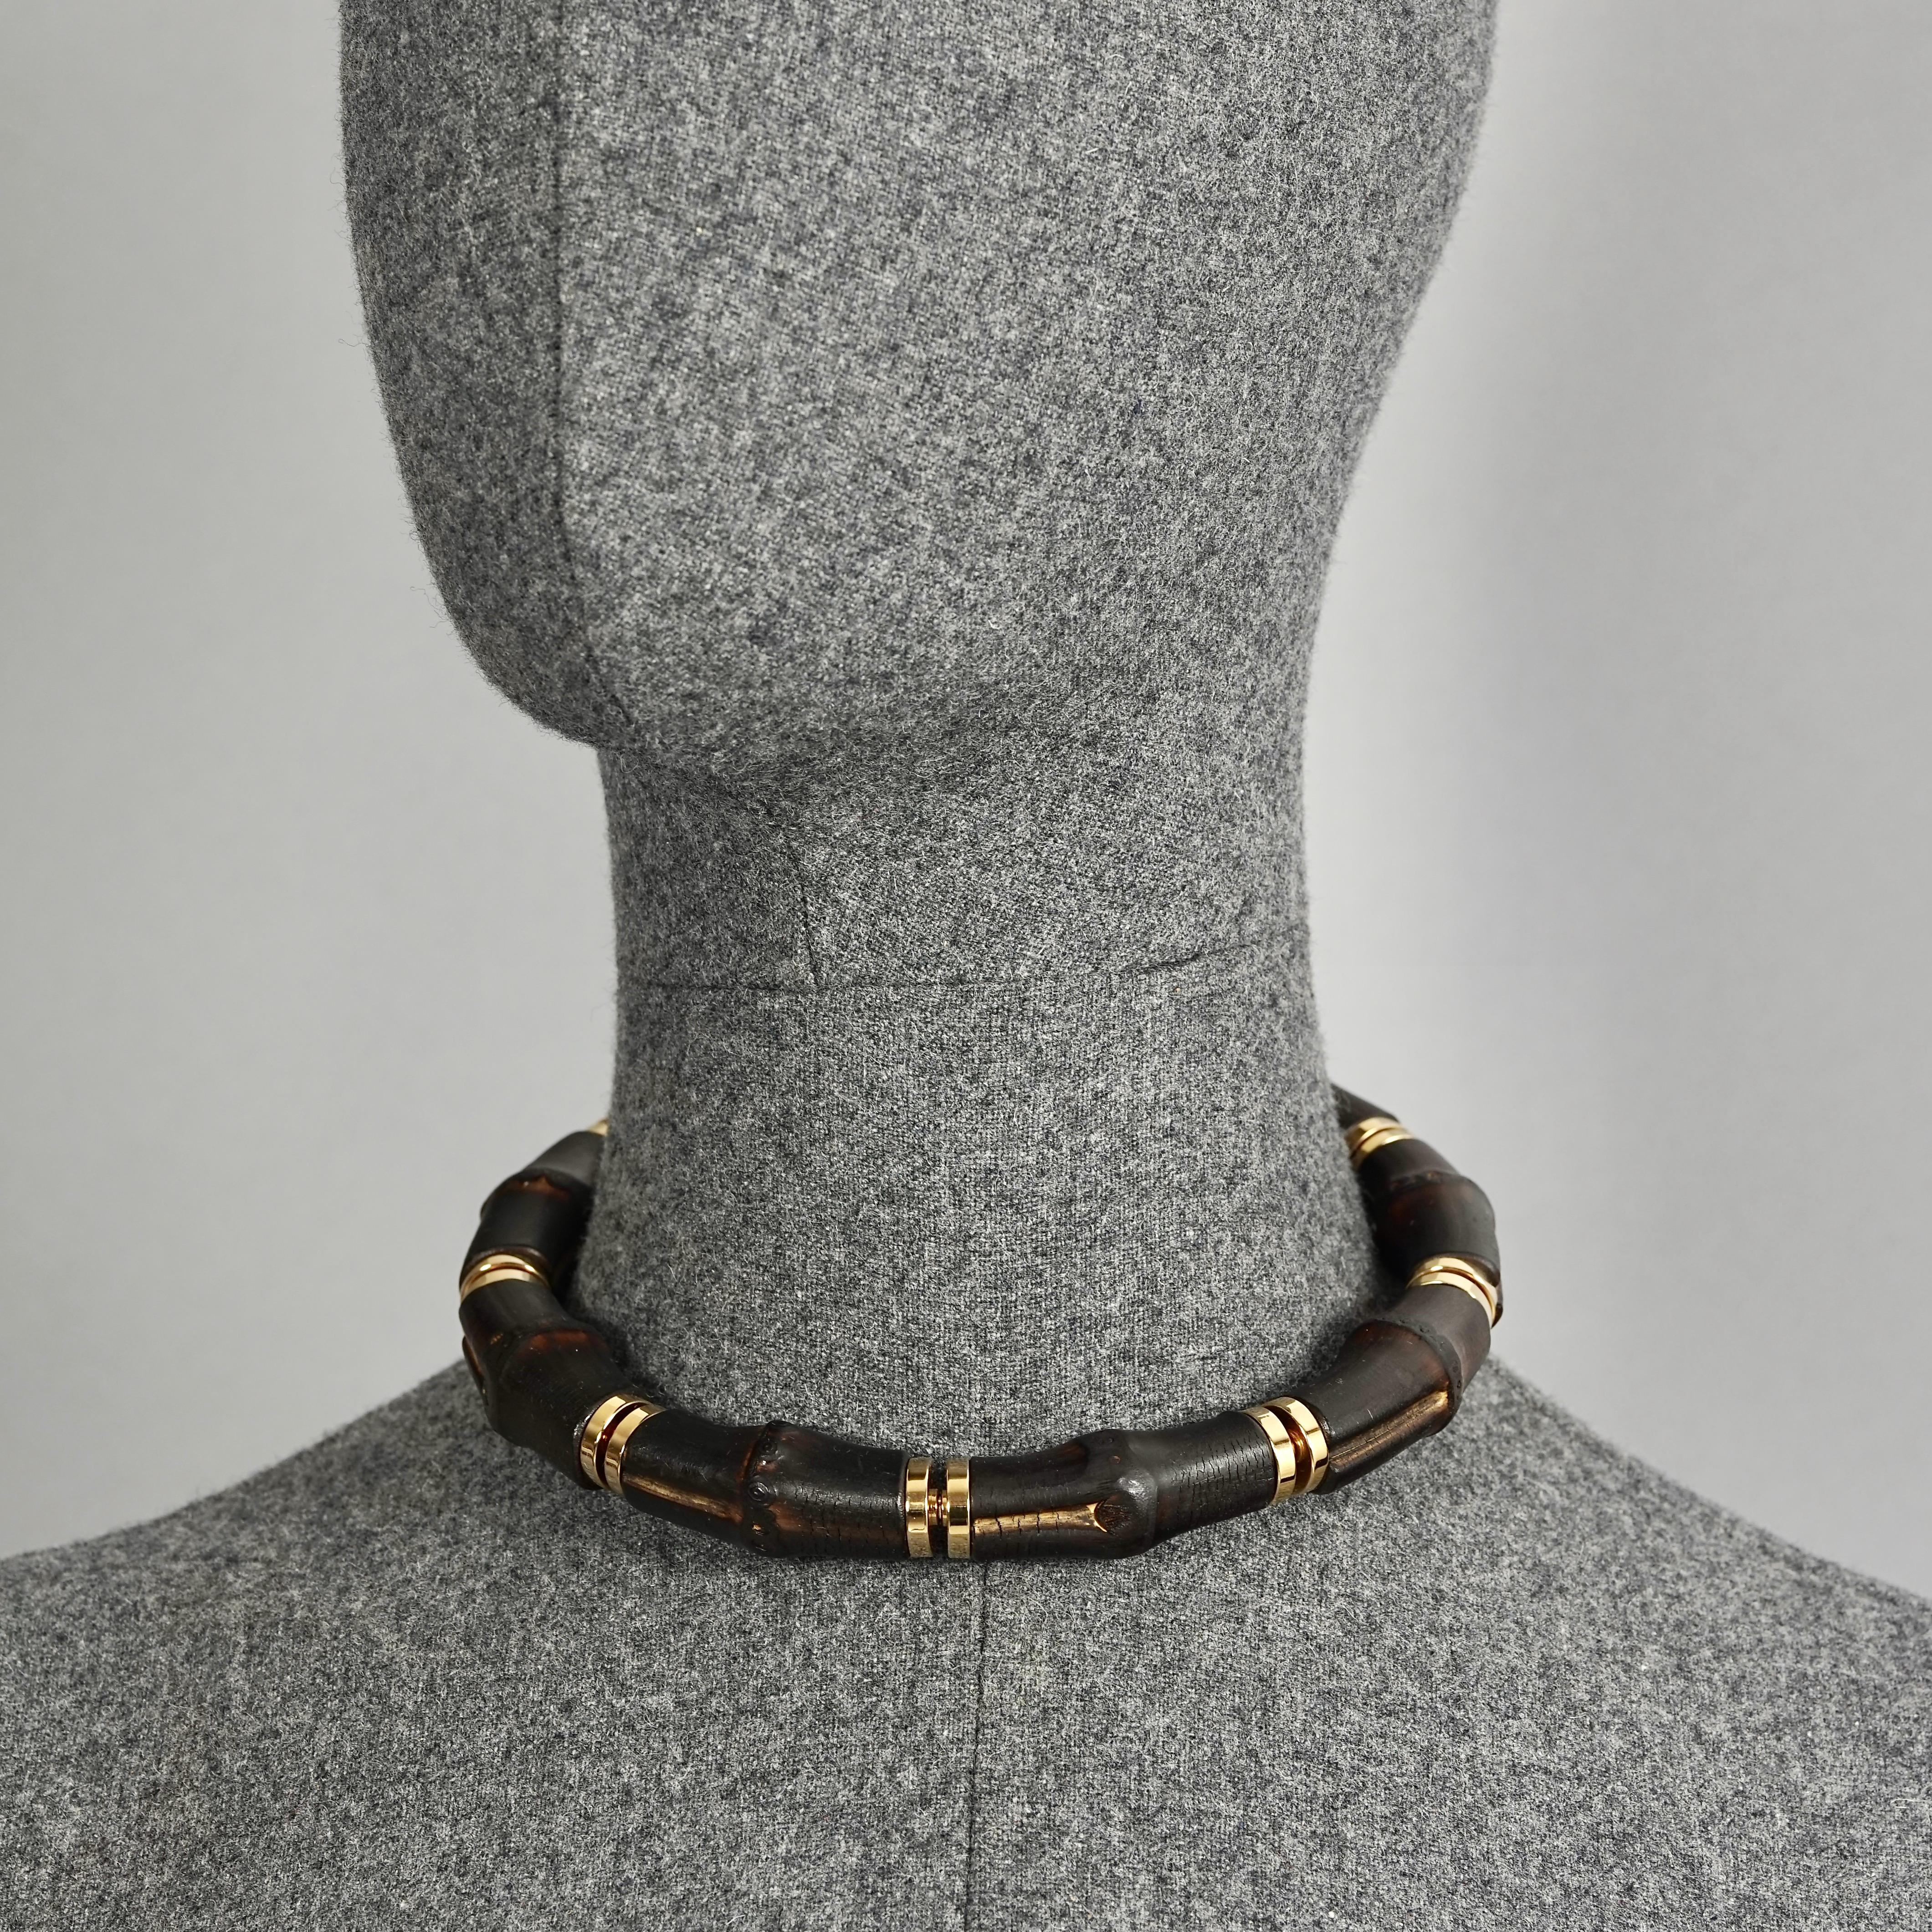 Vintage GUCCI Natural Bamboo Rigid Choker Necklace

Measurements:
Height: 0.71 inch (1.8 cm)
Inner Circumference: 13.78 inches (35 cm)

Features:
- 100% Authentic GUCCI.
- Natural bamboo choker.
- Gold tone hardware.
- Signed GUCCI Made in Italy.
-